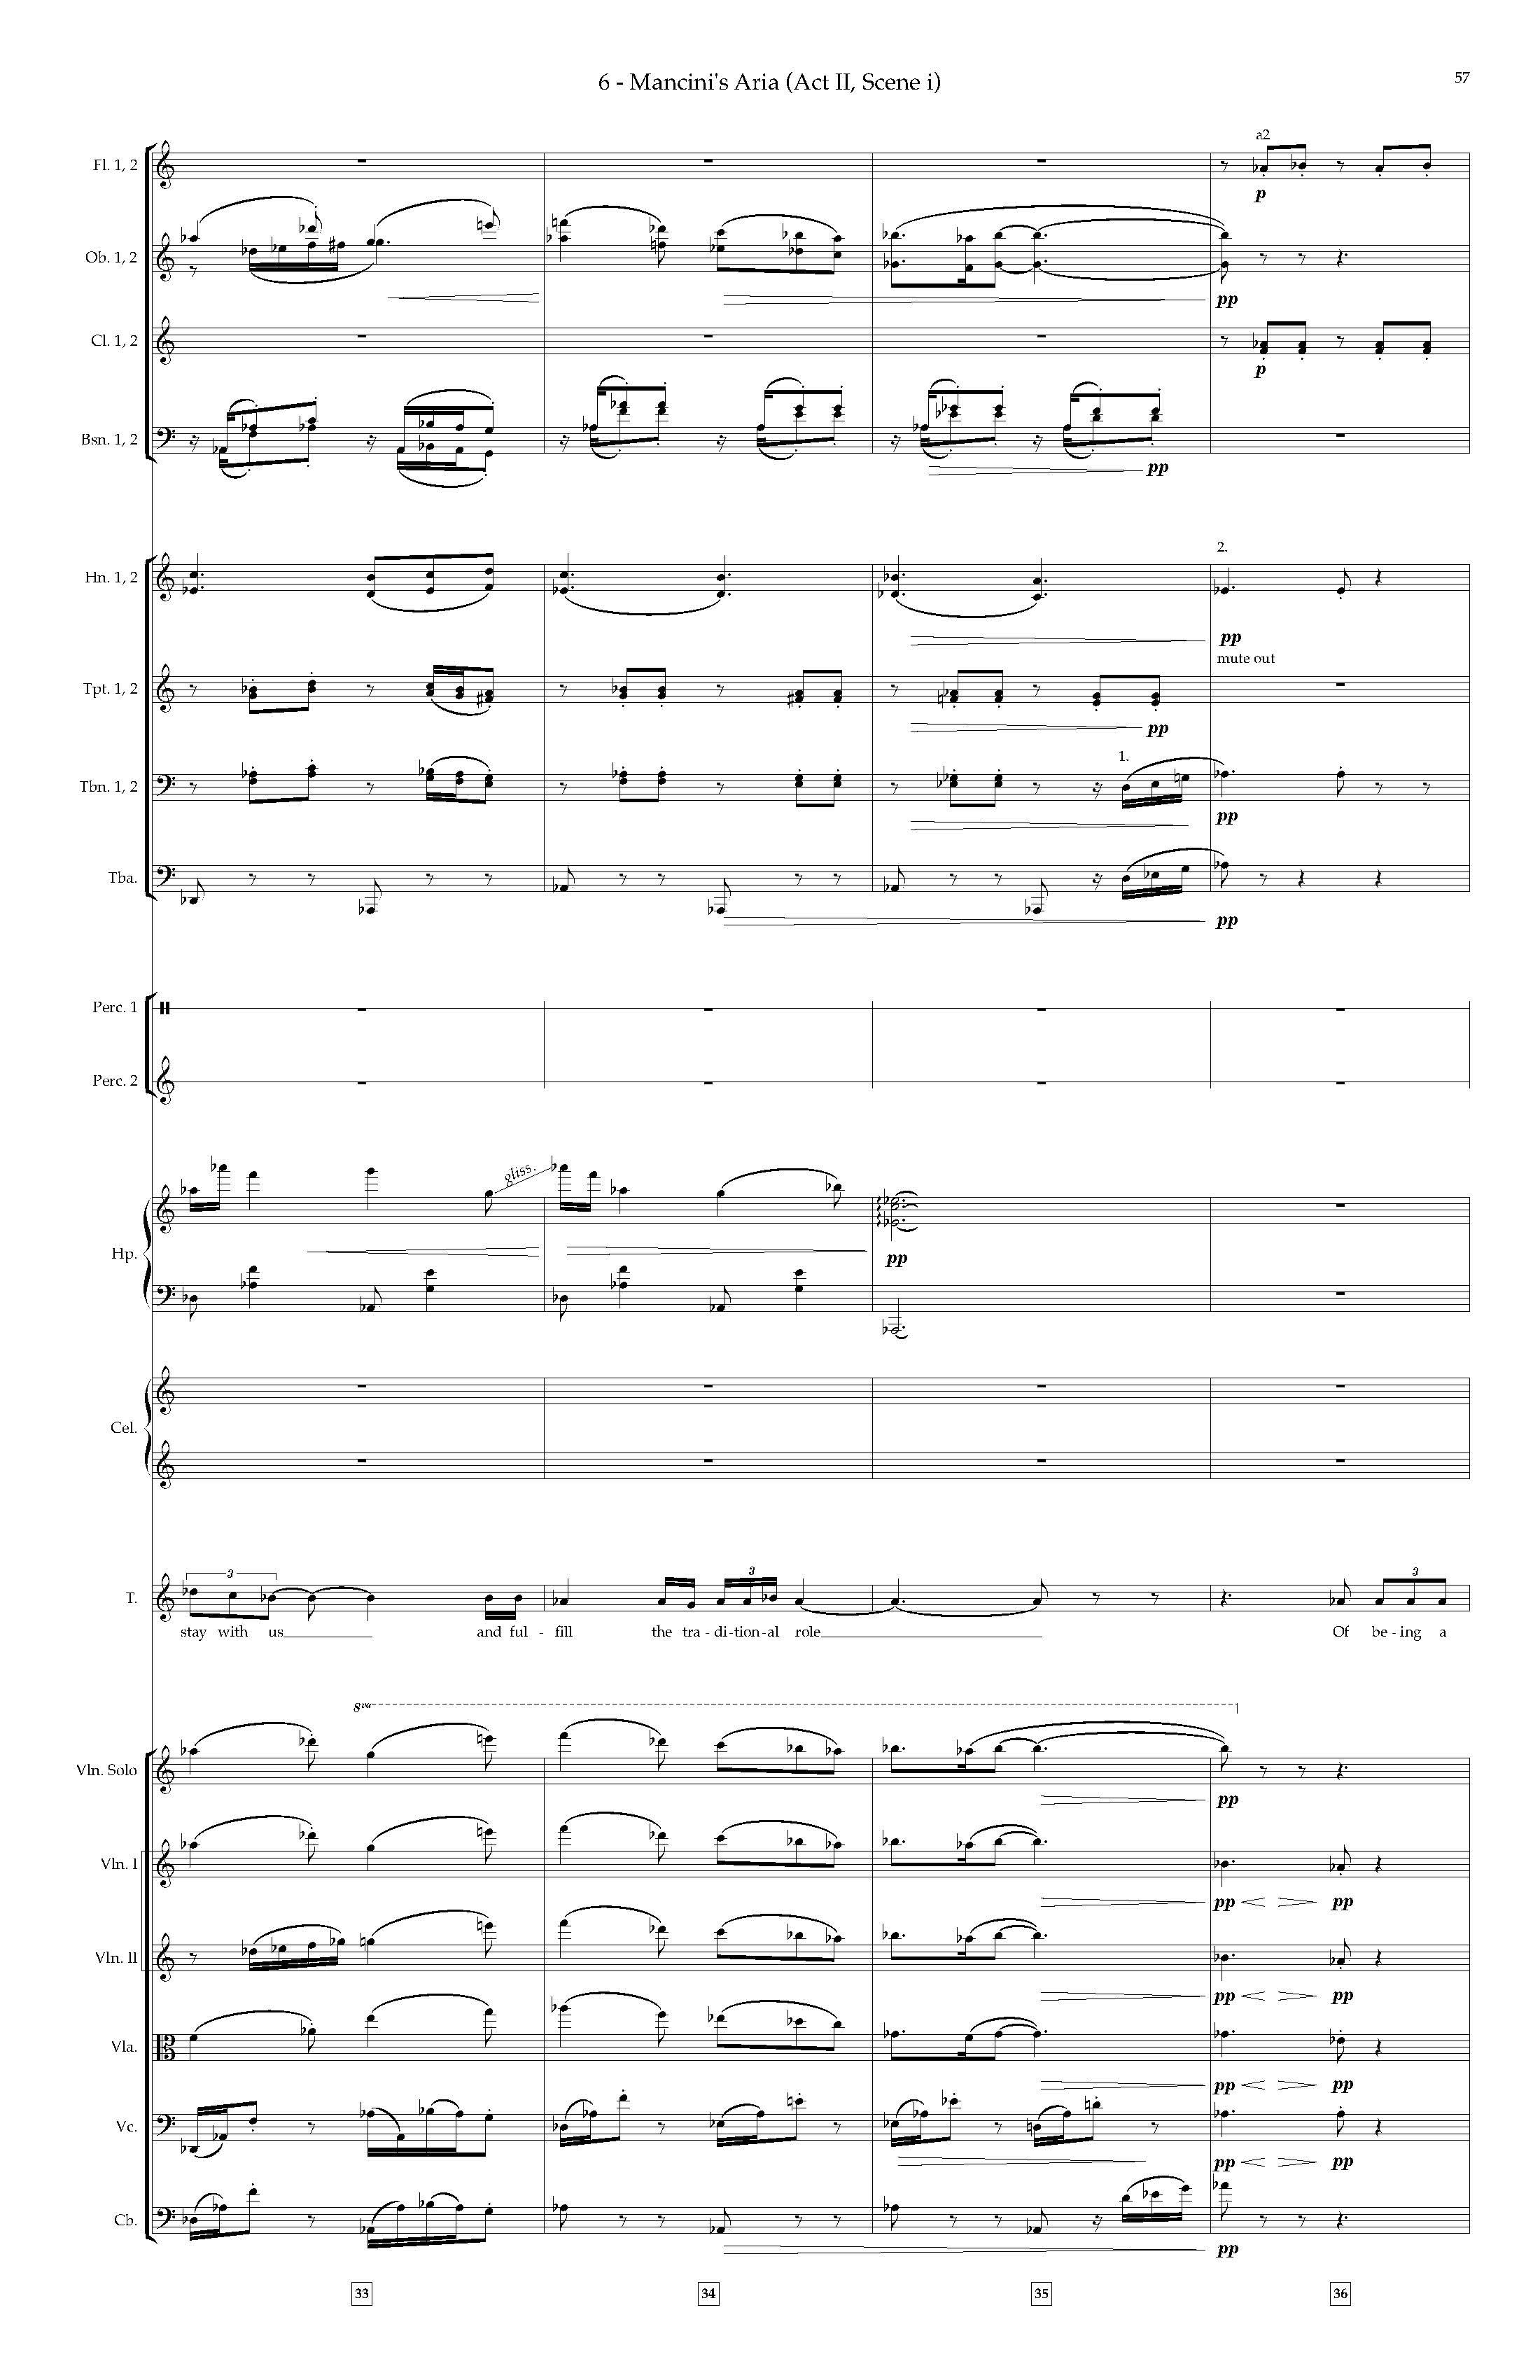 Arias and Interludes from HWGS - Complete Score_Page_63.jpg